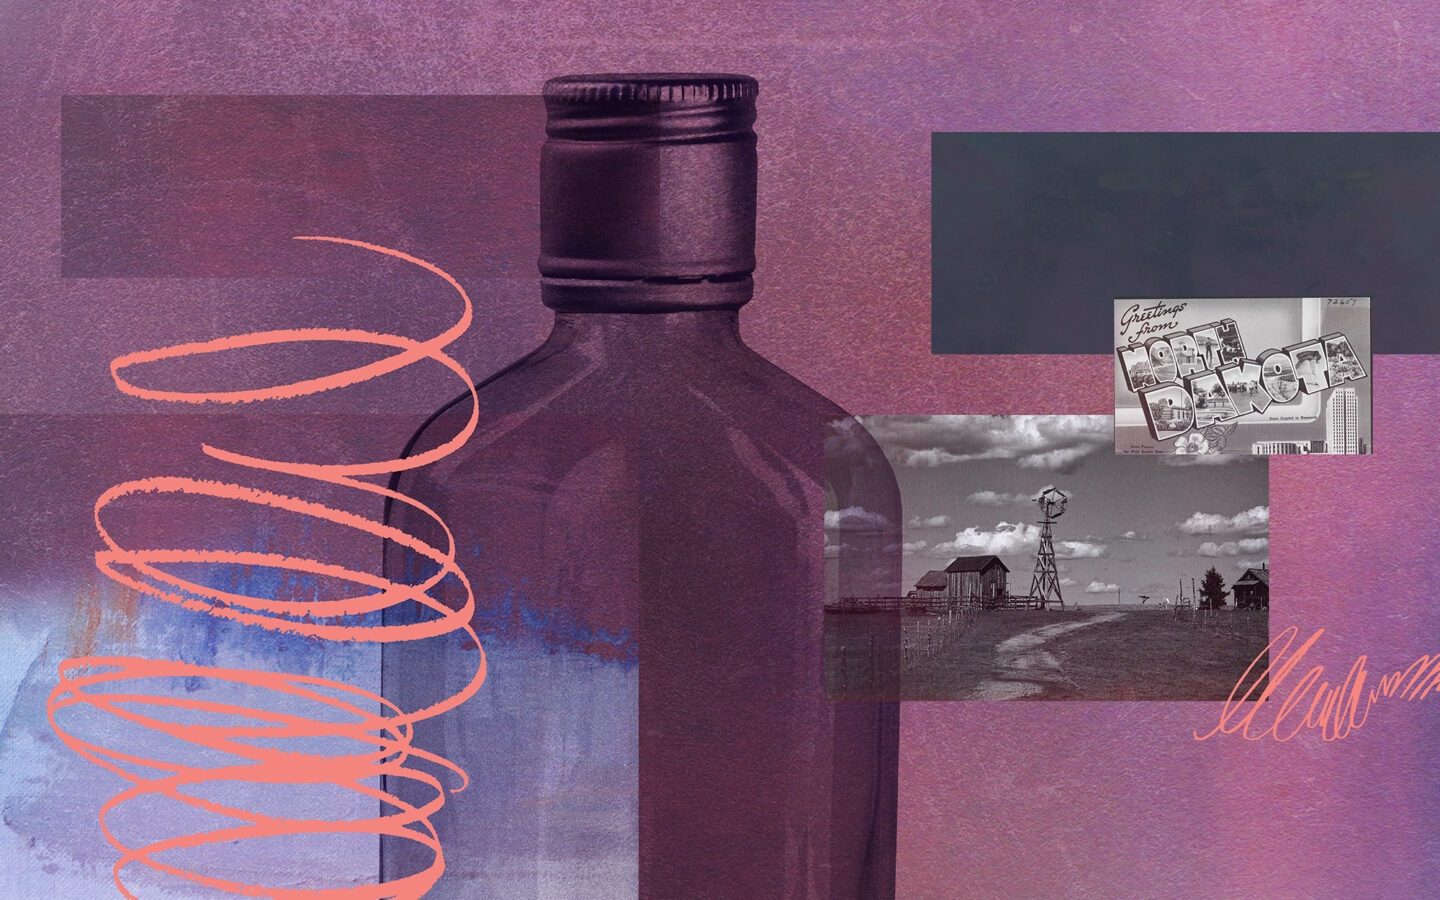 Collage featuring alcohol bottle, North Dakota landscape, and textures